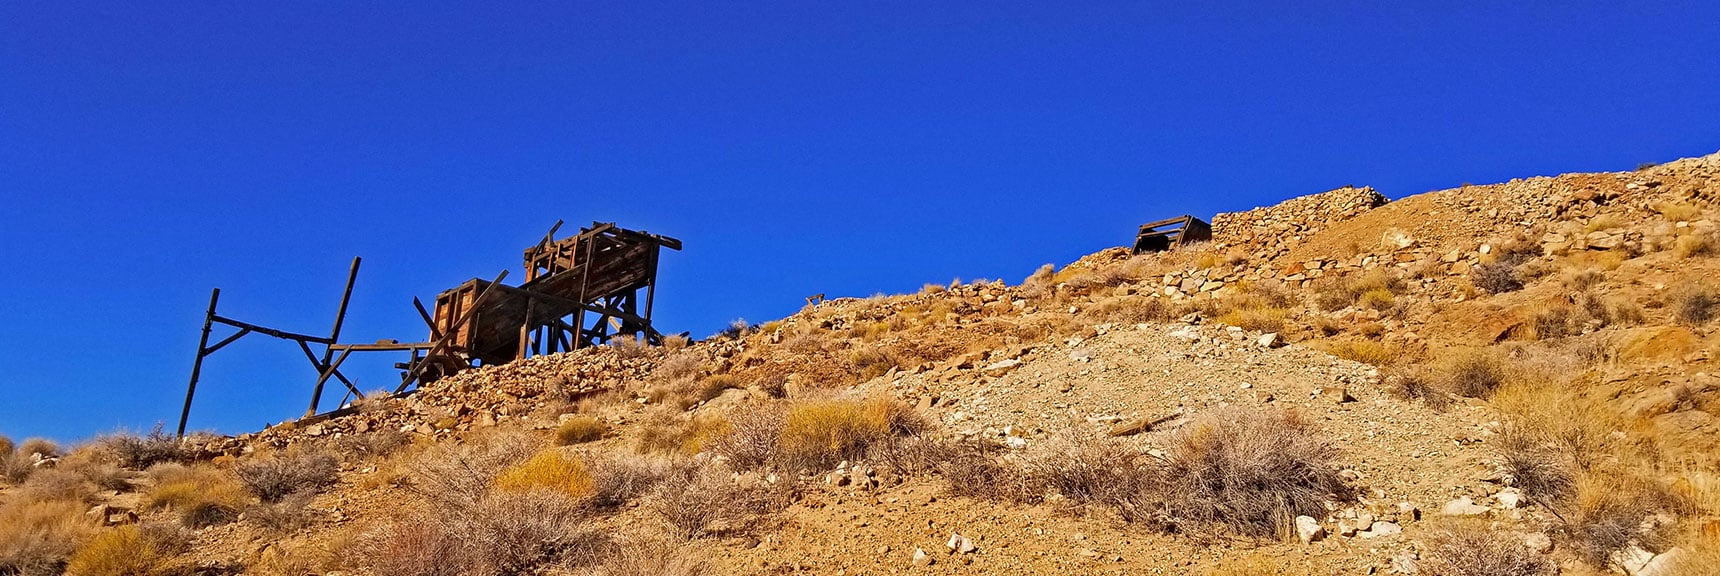 Approaching Cashier Mill Where Gold Was Separated from Raw Ore| Eureka Mine, Harrisburg, Cashier Mill, Death Valley, California